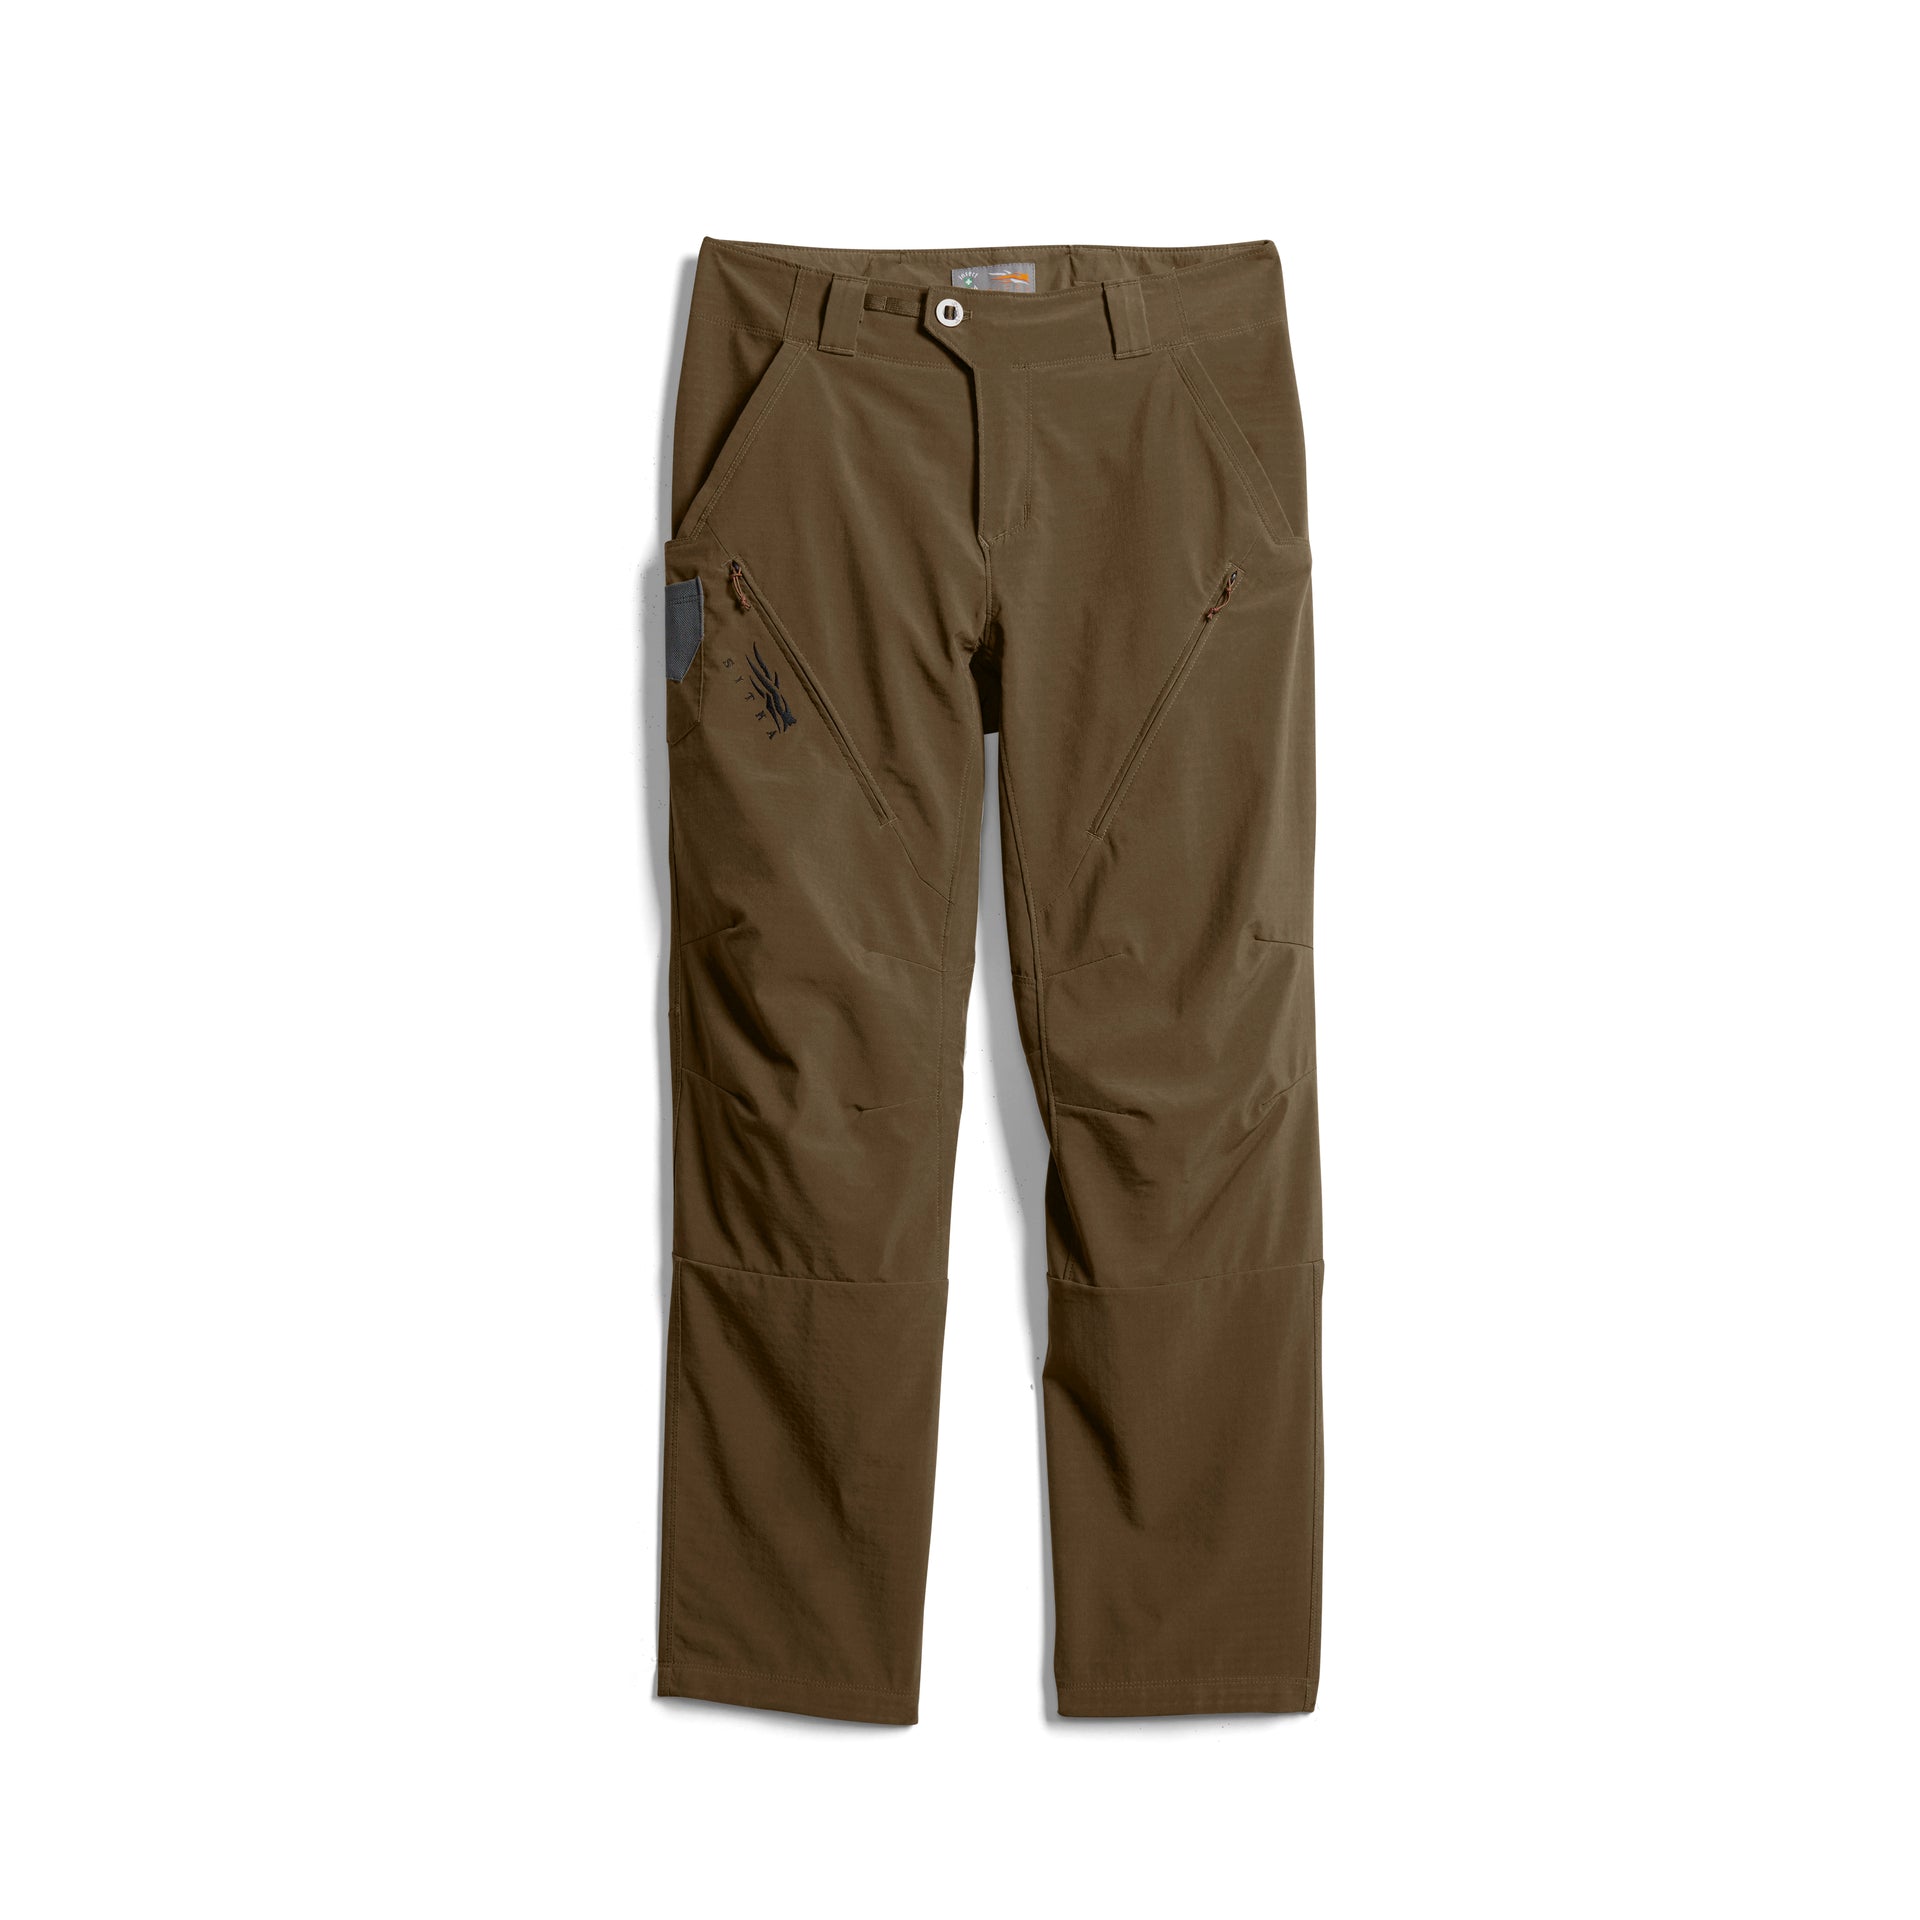 Lightweight UPF Insect Shield Outdoor Pants